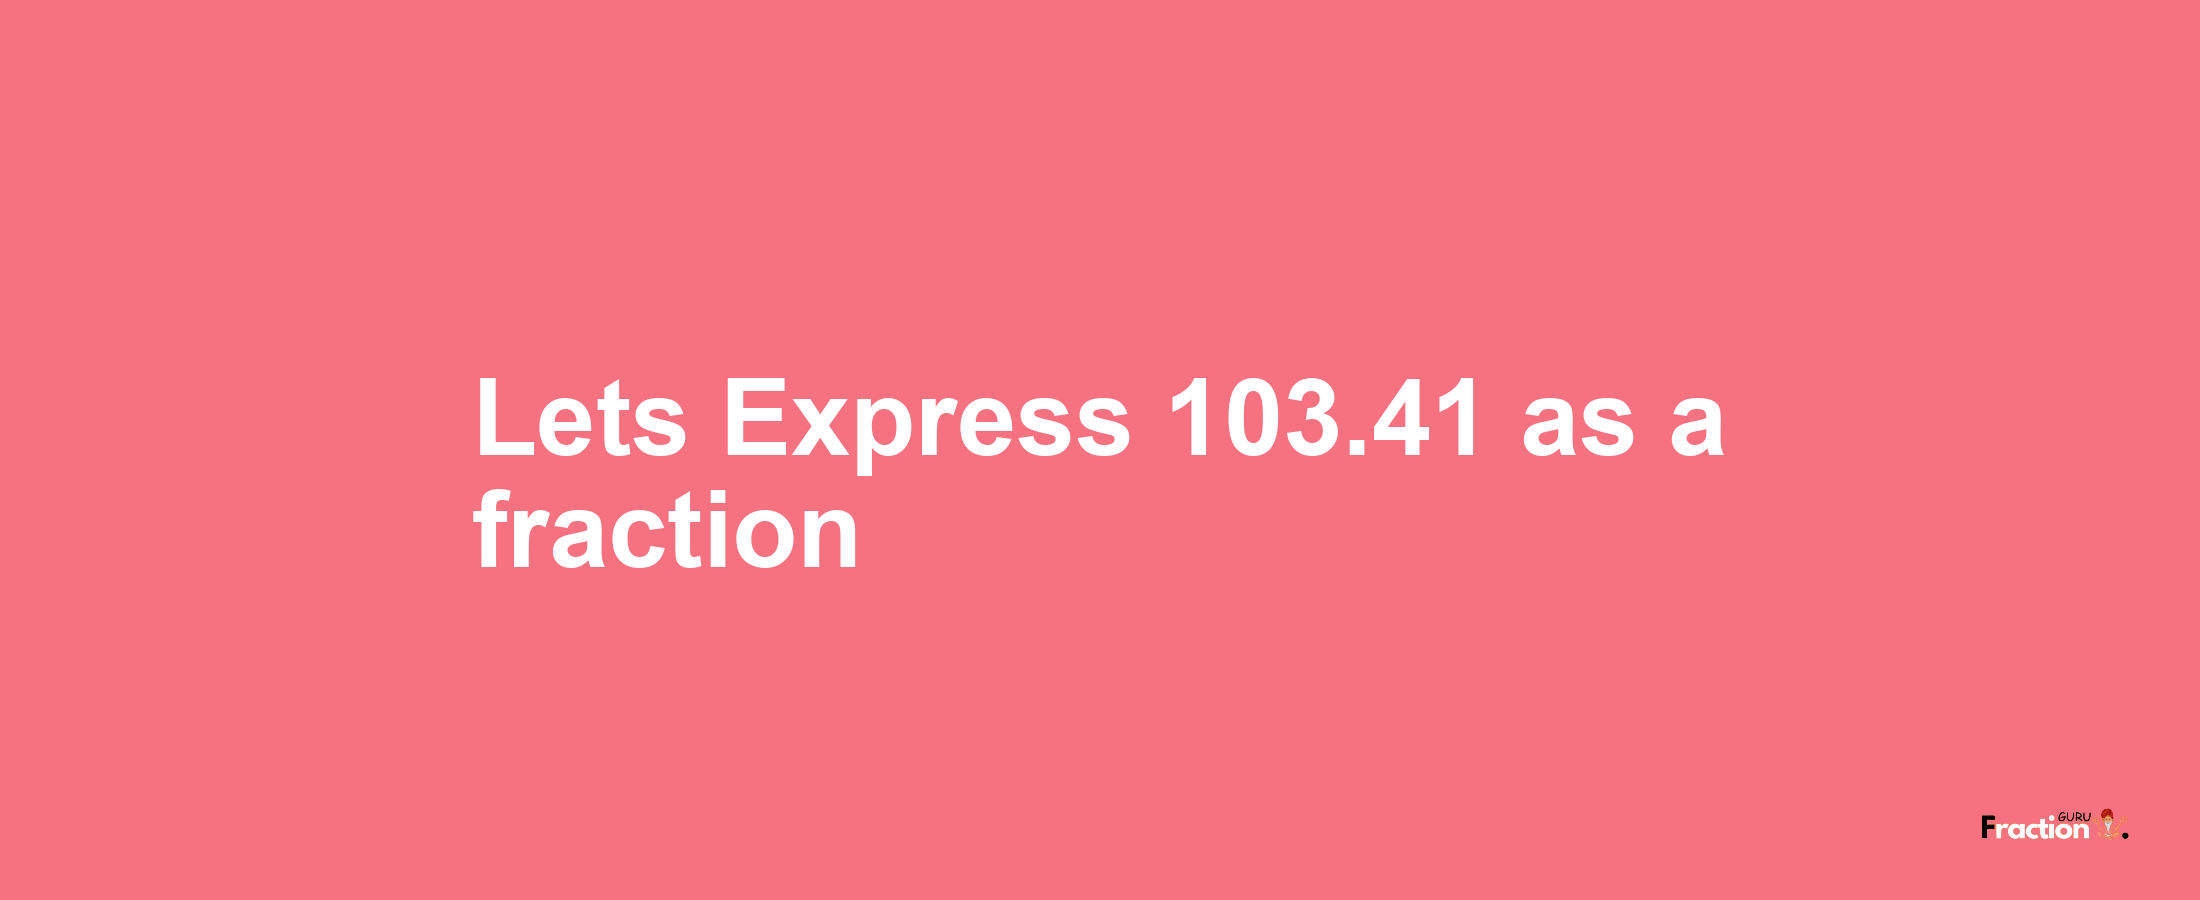 Lets Express 103.41 as afraction